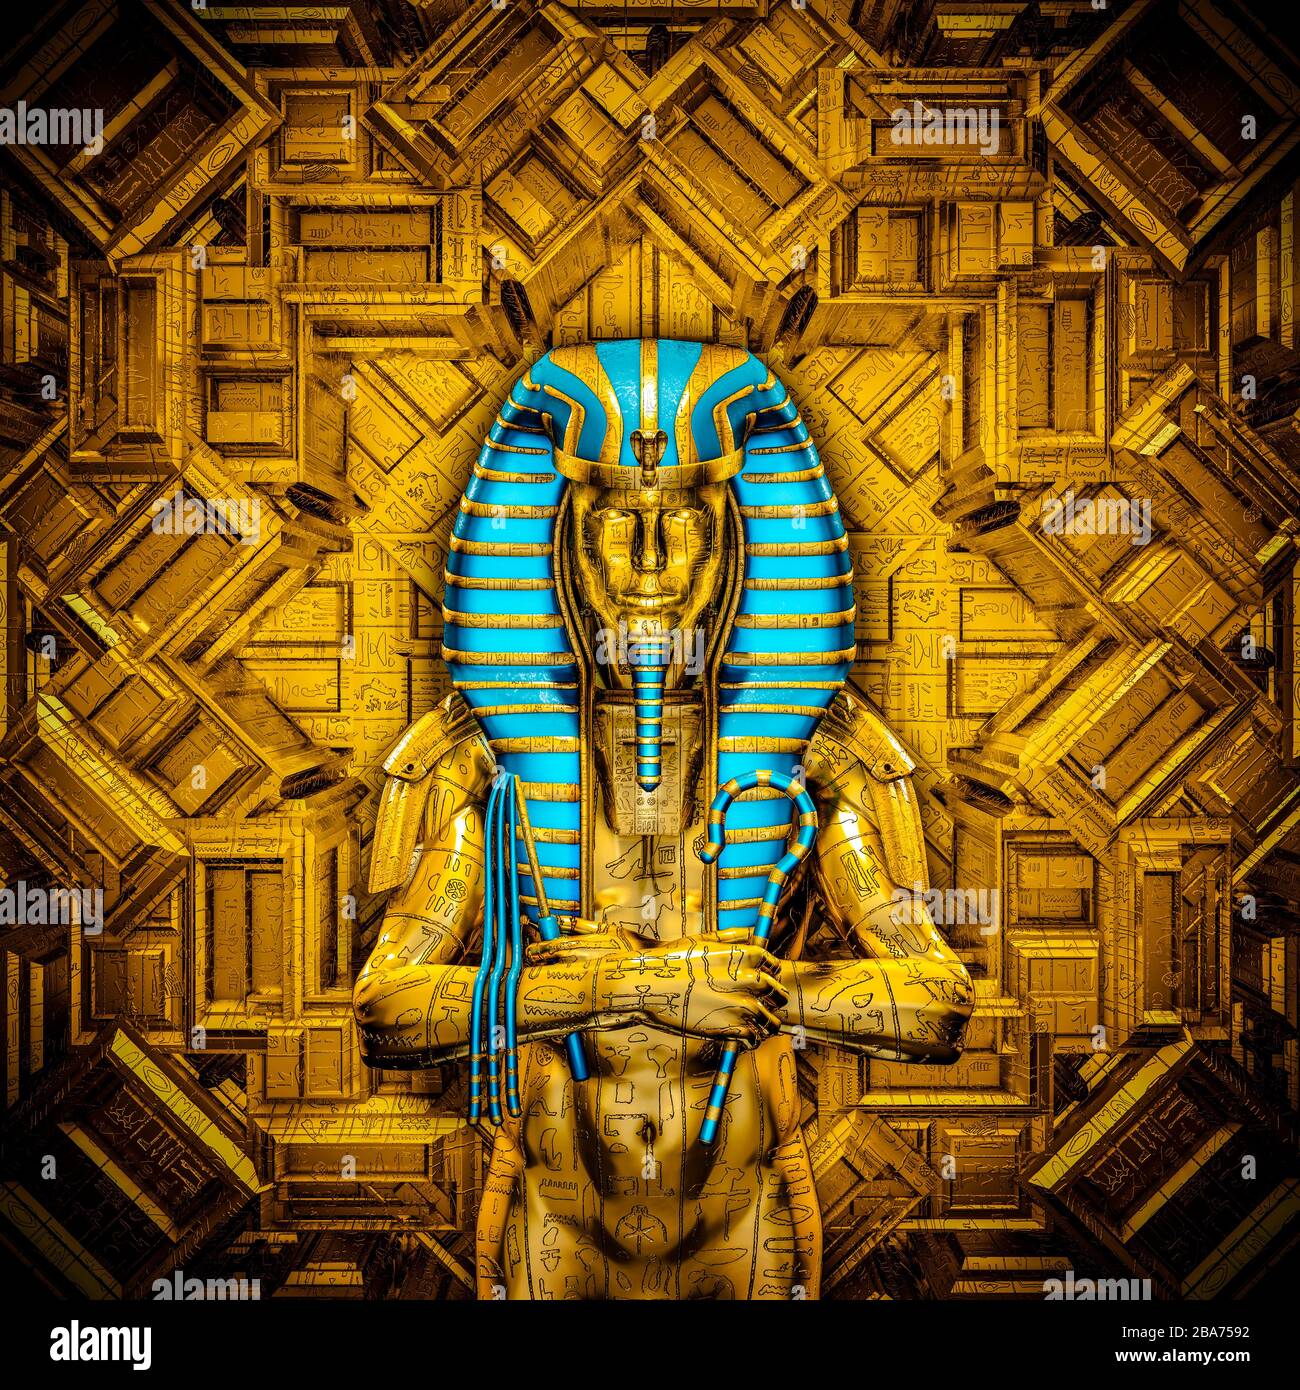 The sacred king / 3D illustration of golden futuristic male Egyptian pharaoh covered in hieroglyphic symbols inside gold temple Stock Photo